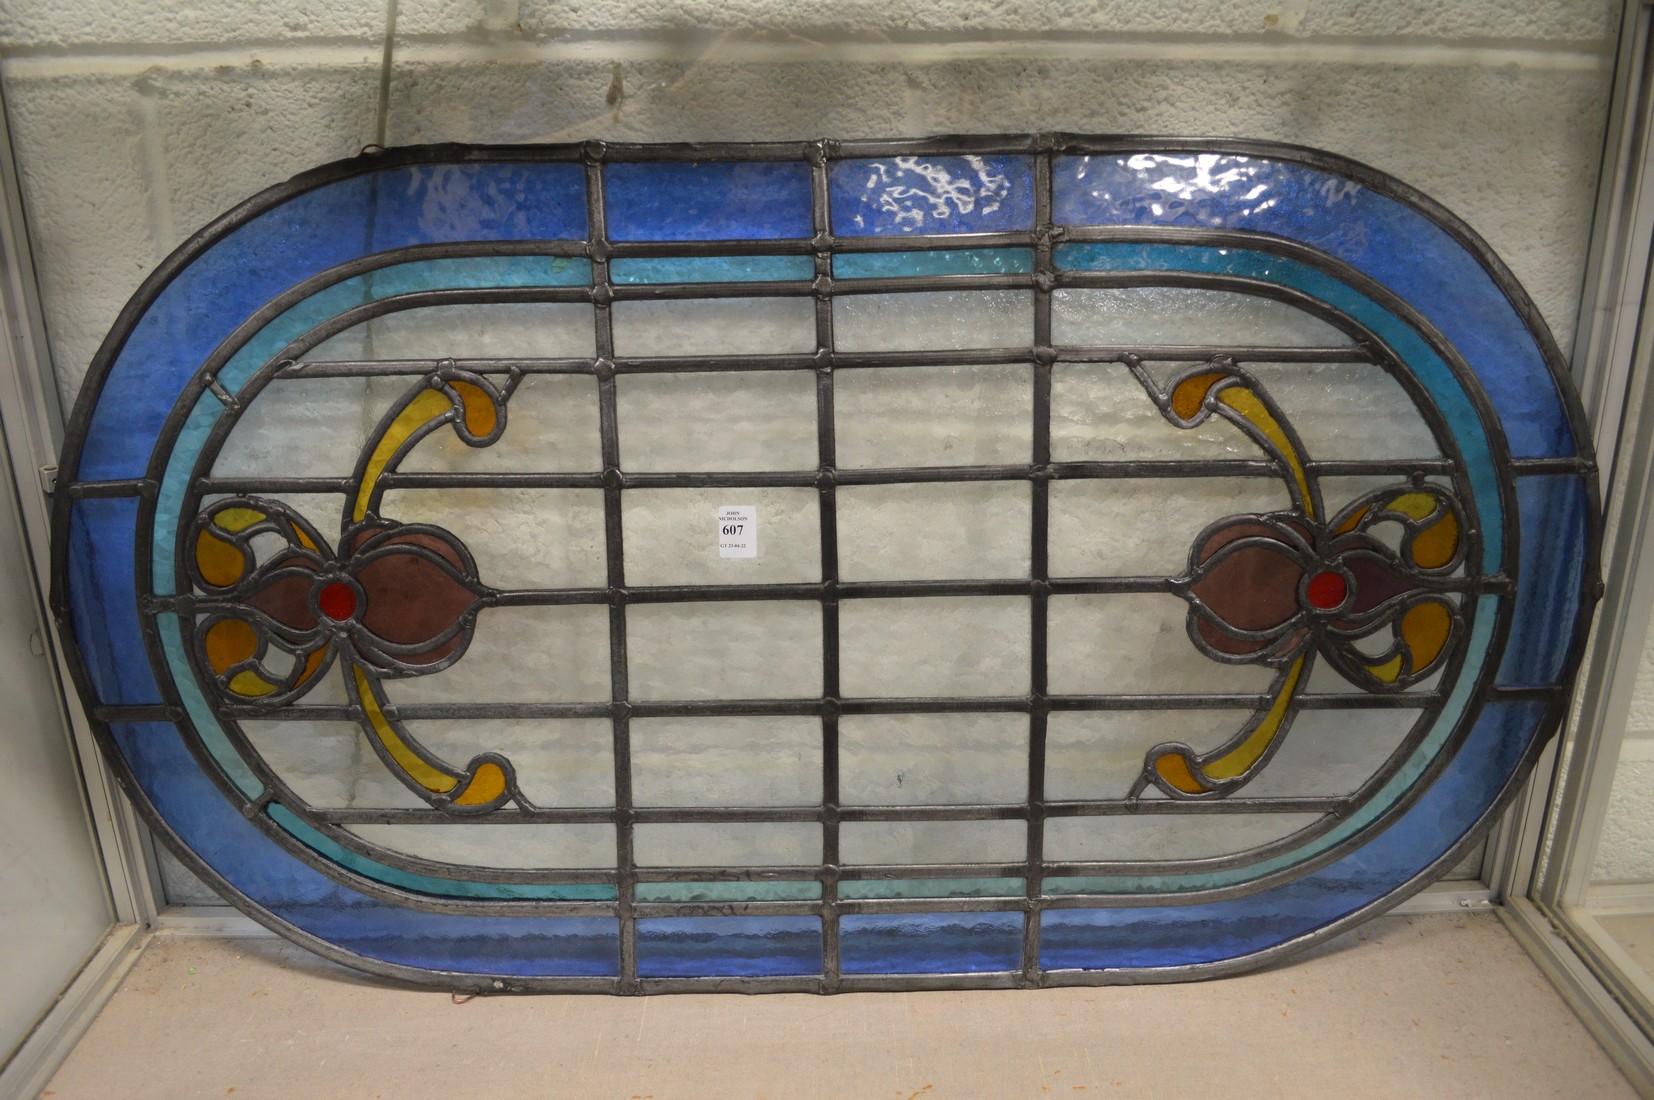 A leaded stained glass panel.